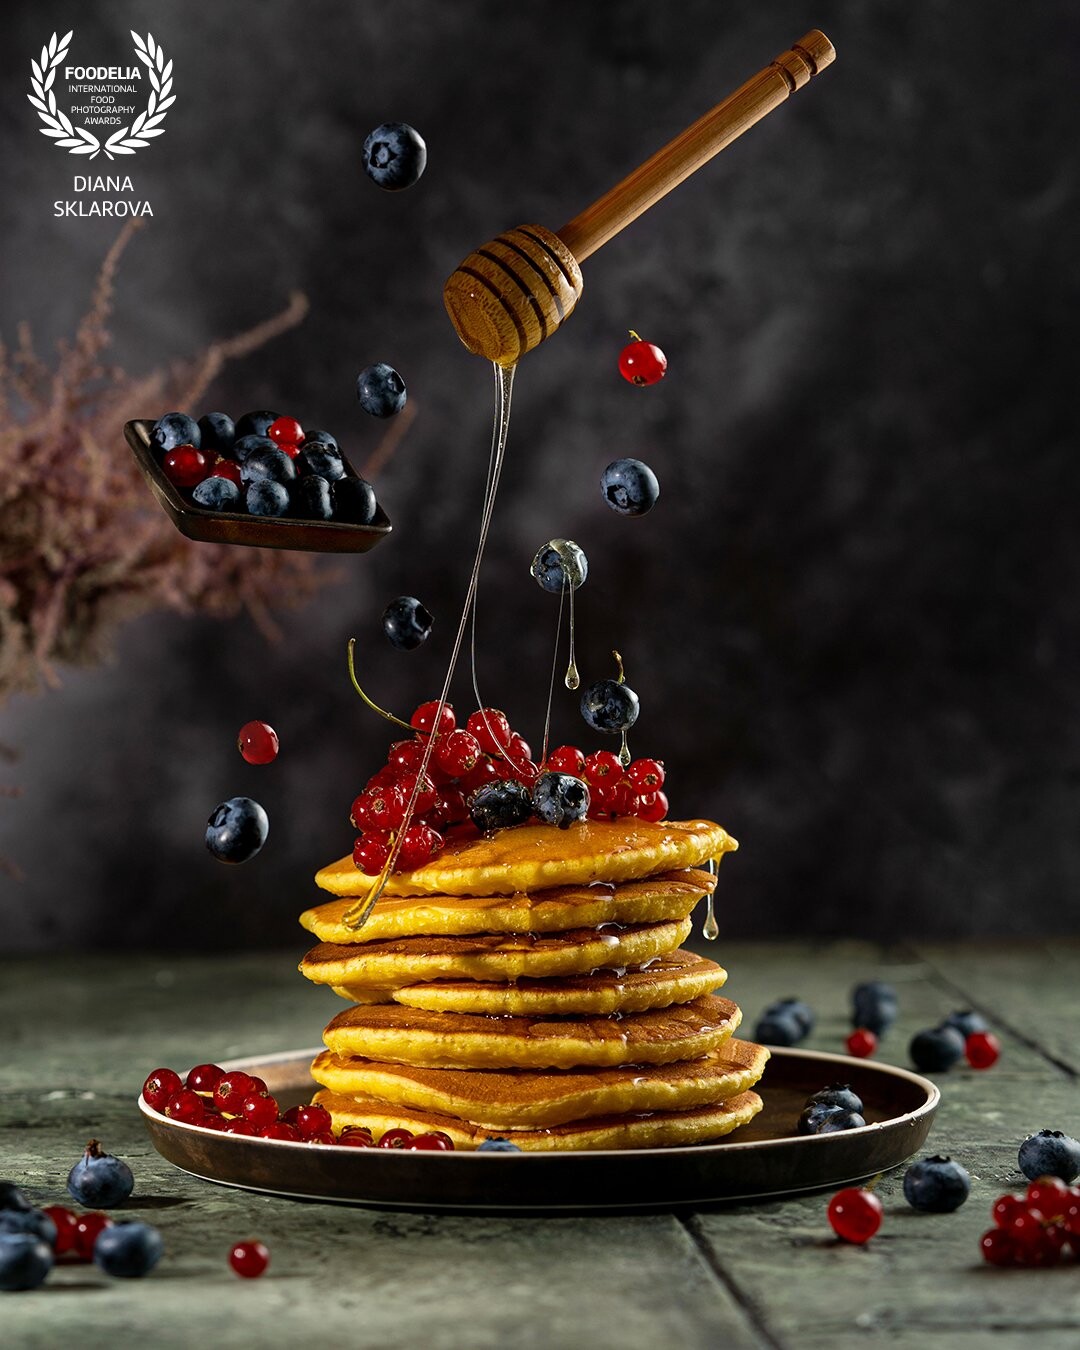 Homemade freshly baked pancakes with fresh berries and honey. Beautiful levitation art dessert photography on dark green textured table.